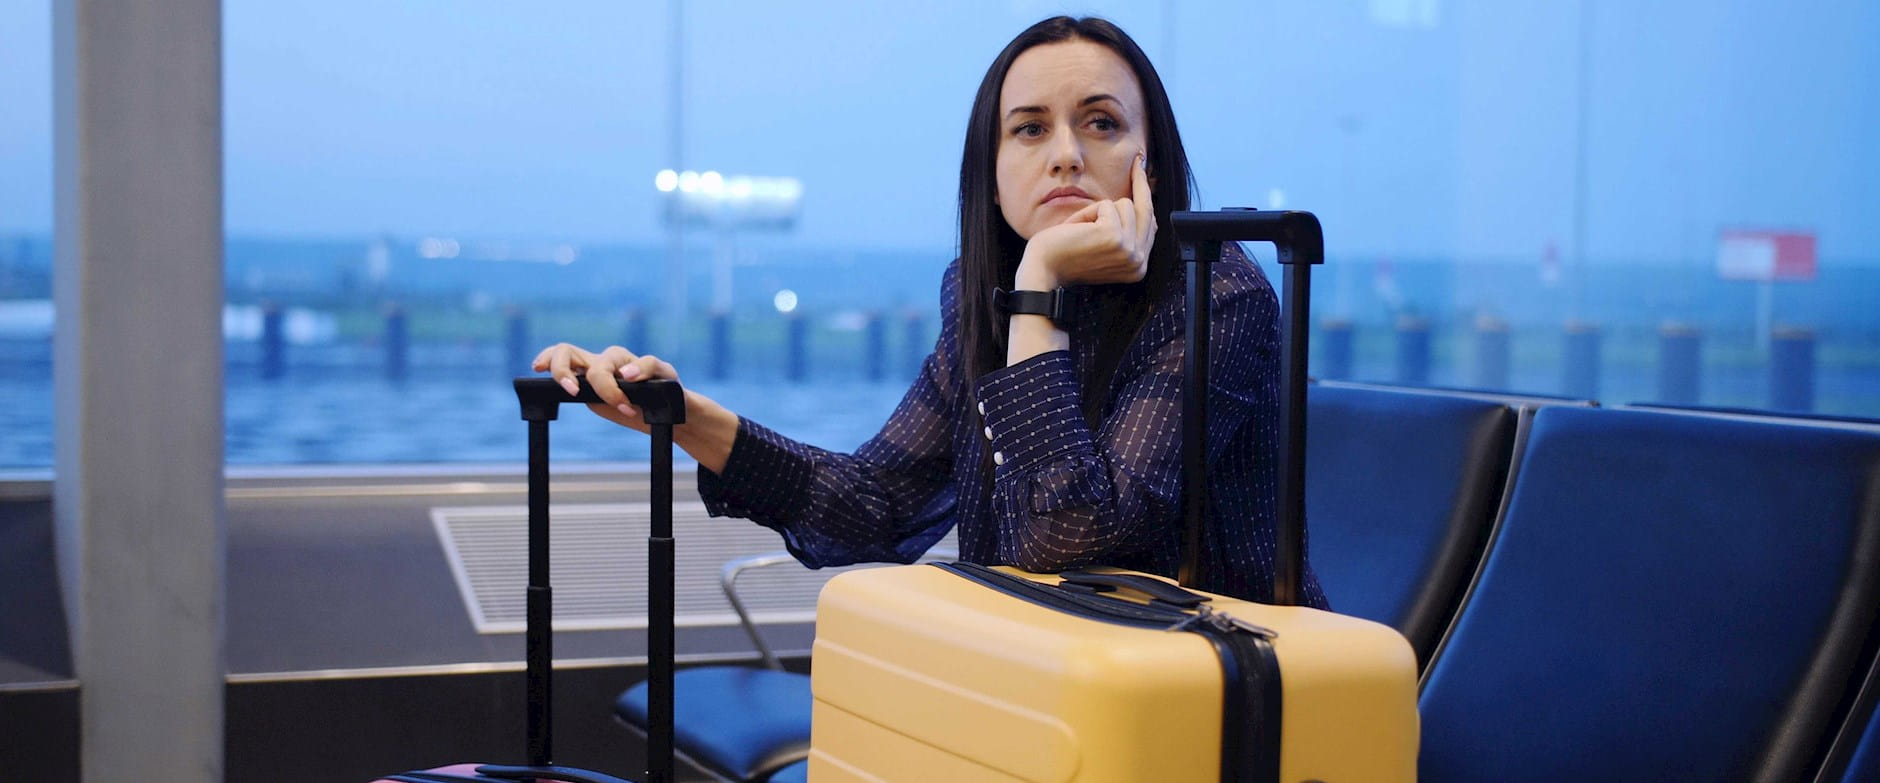 Woman waiting for flight